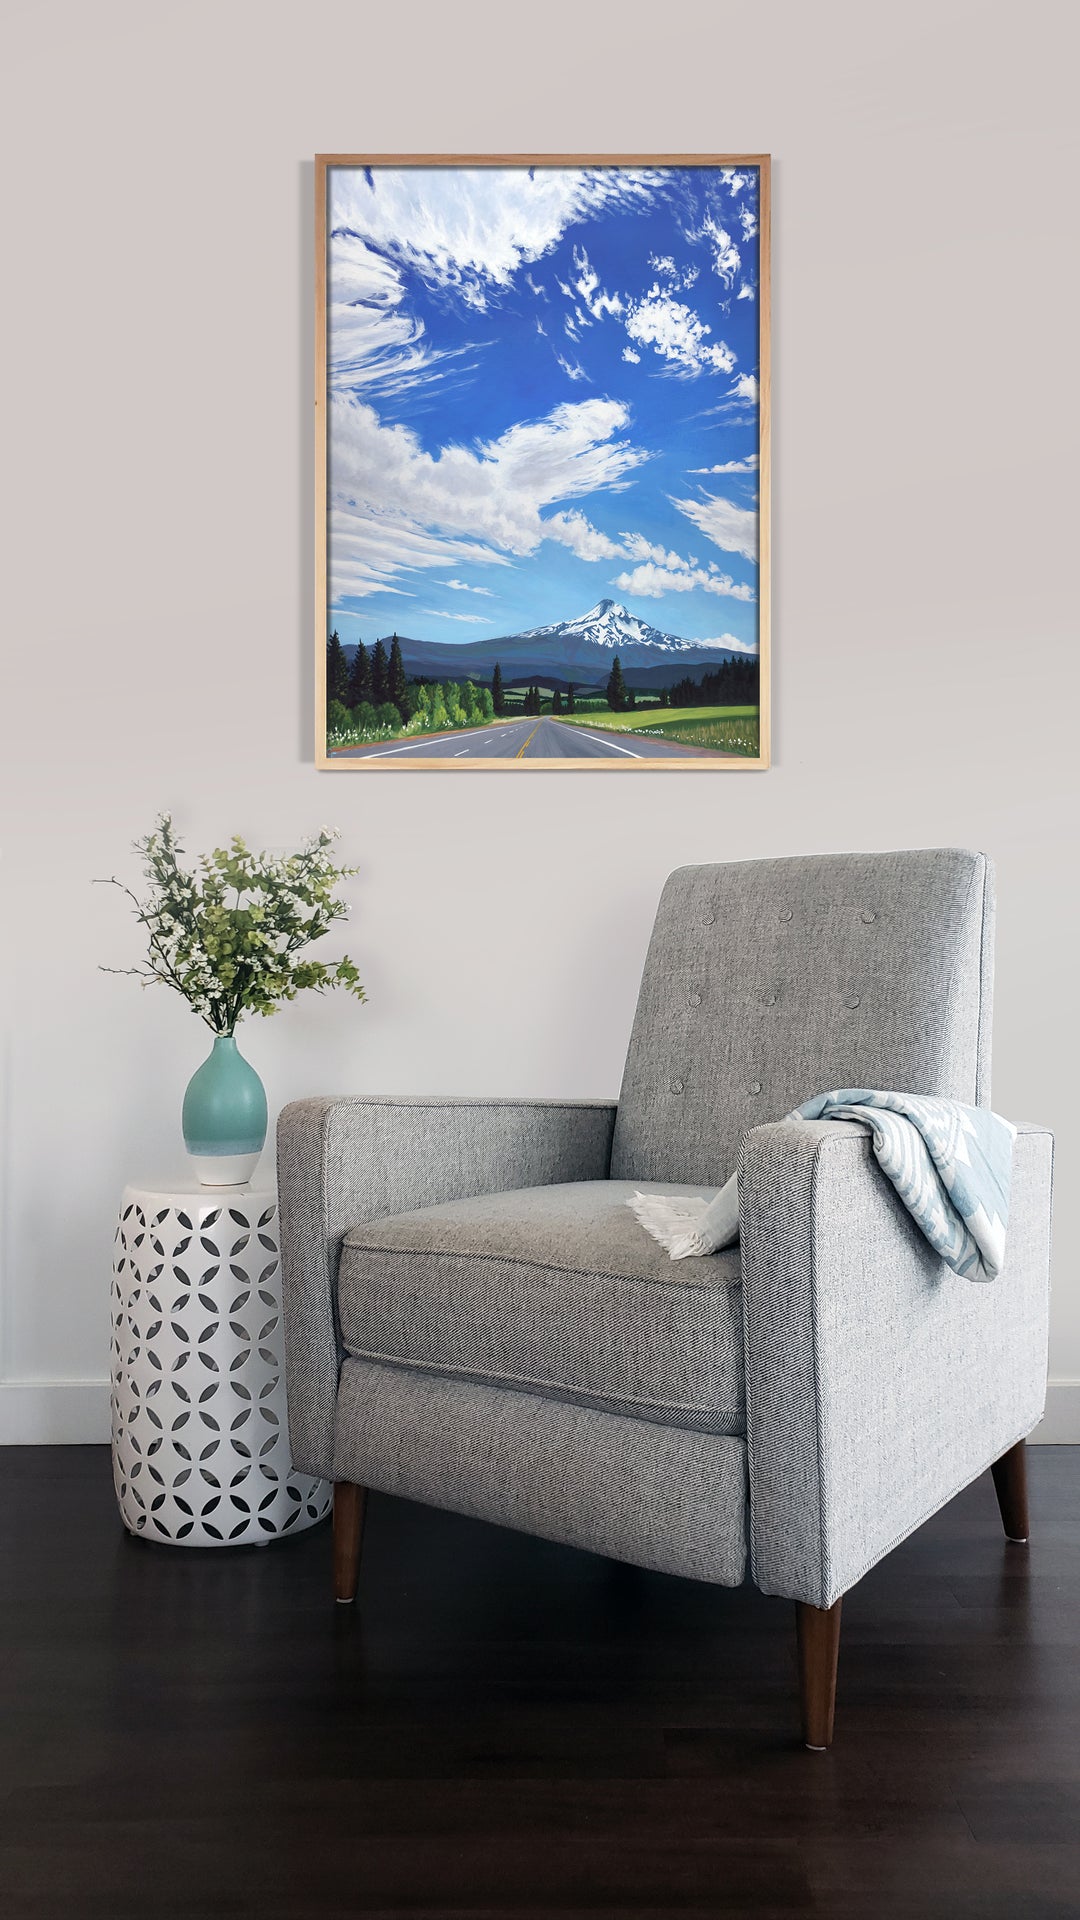 Large art print of a mountain and blue sky over a chair.